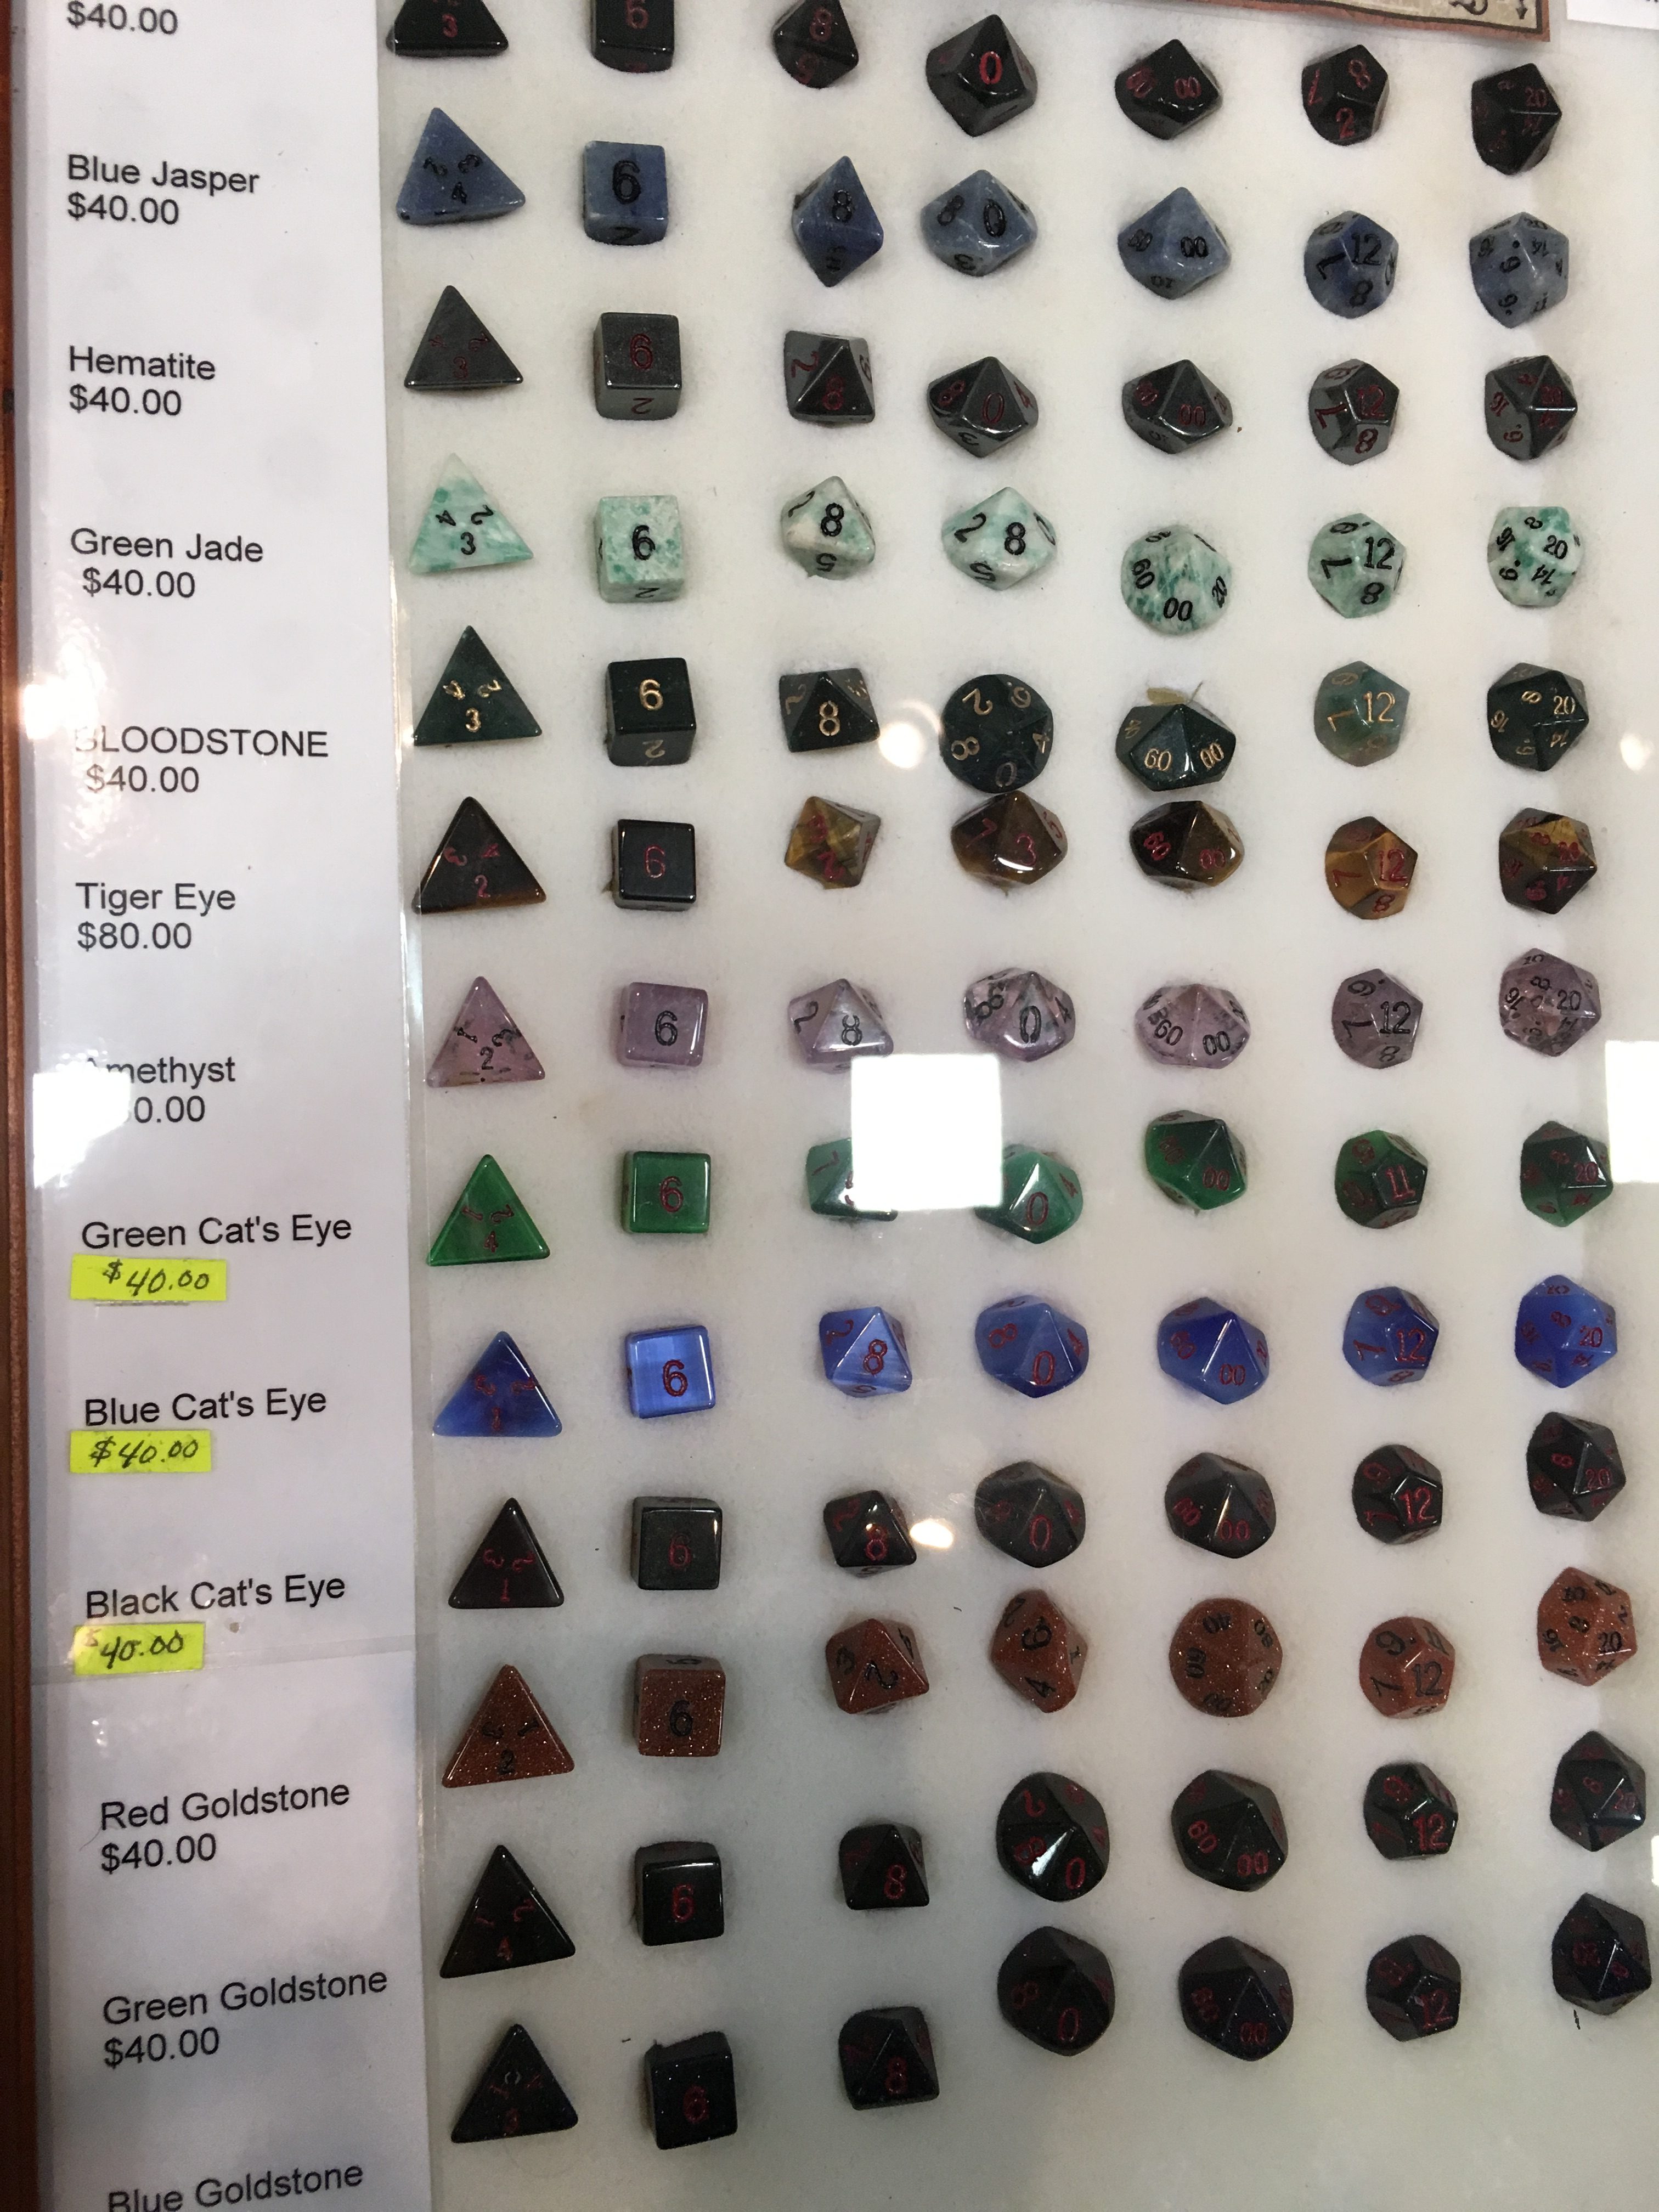 A display case filled with gemstone dice